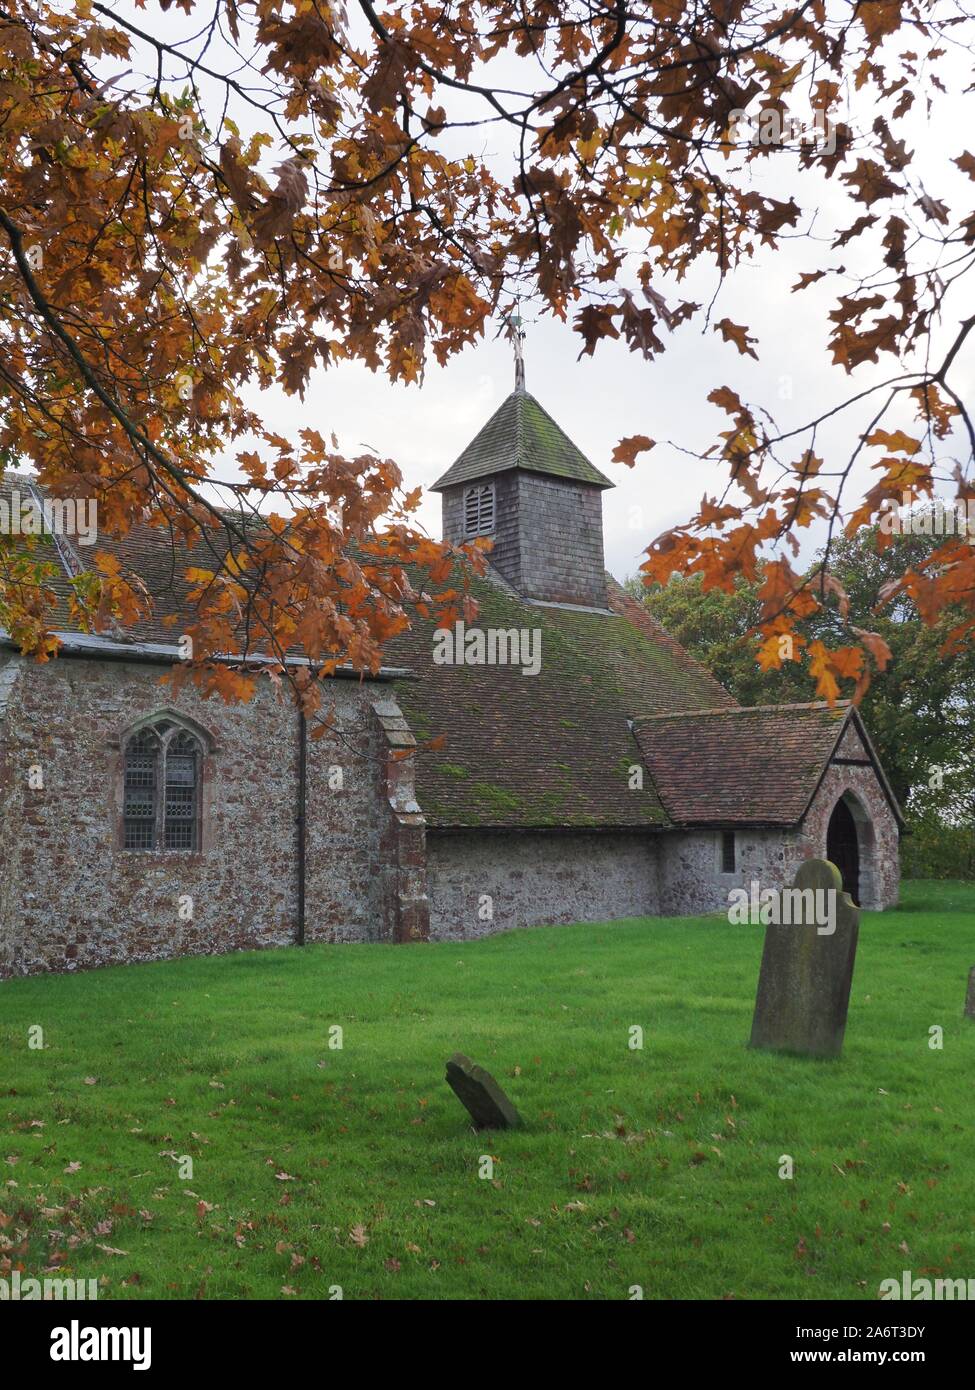 Harty, Kent, UK. 28th October, 2019. UK Weather: overcast skies and Autumn colours at Kent's most remote church - the St Thomas the Apostle located in Harty, Kent. Credit: James Bell/Alamy Live News Stock Photo